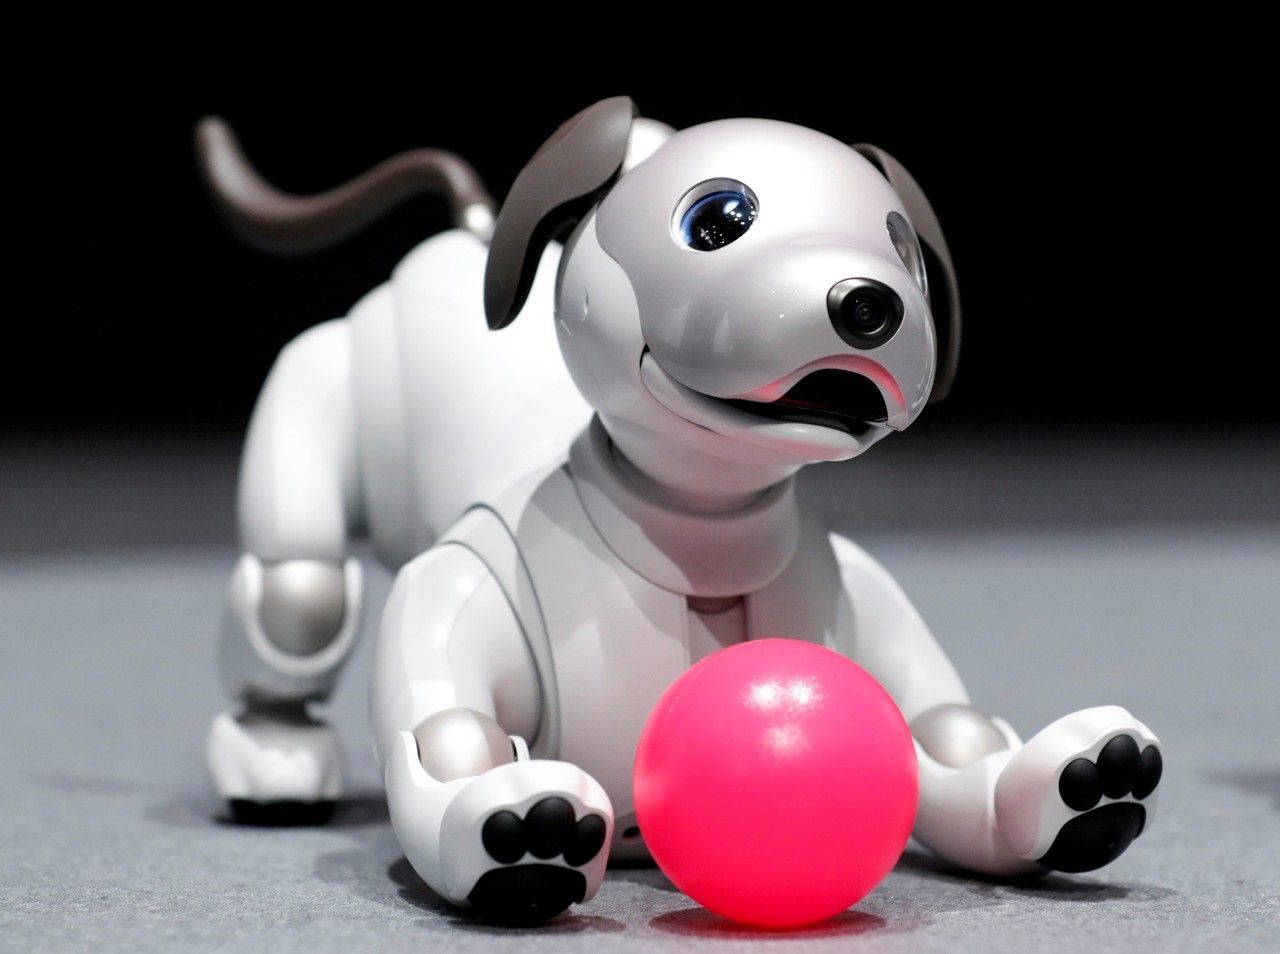 Sony sells thousands of Aibo robot dogs as it considers US launch